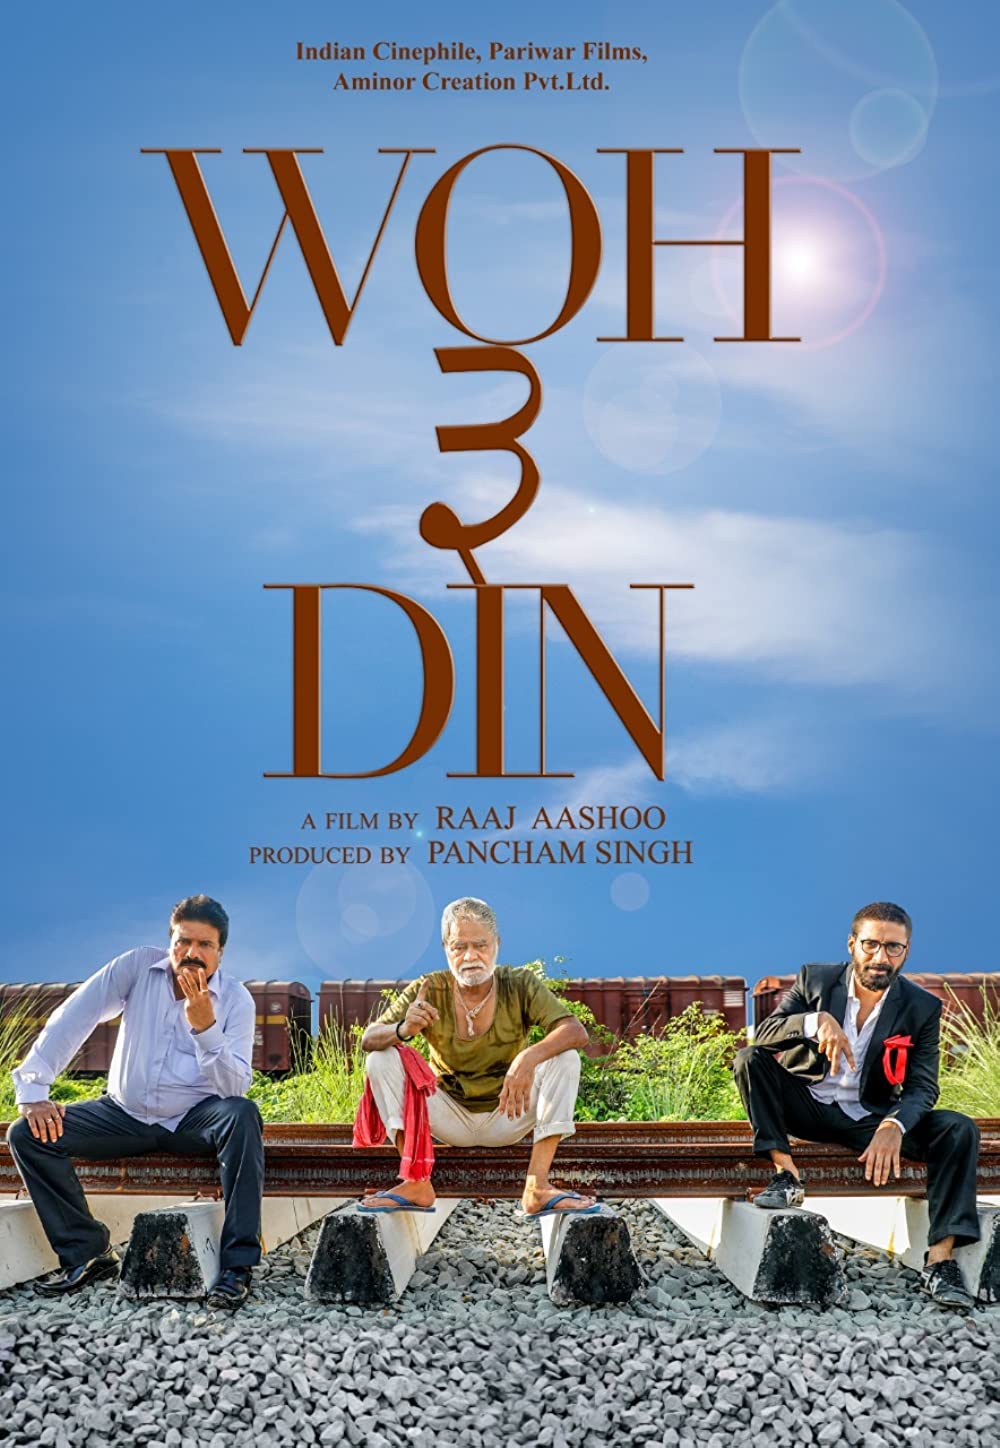 Woh 3 Din Movie Review | Woh 3 Din Filmy Rating 2022